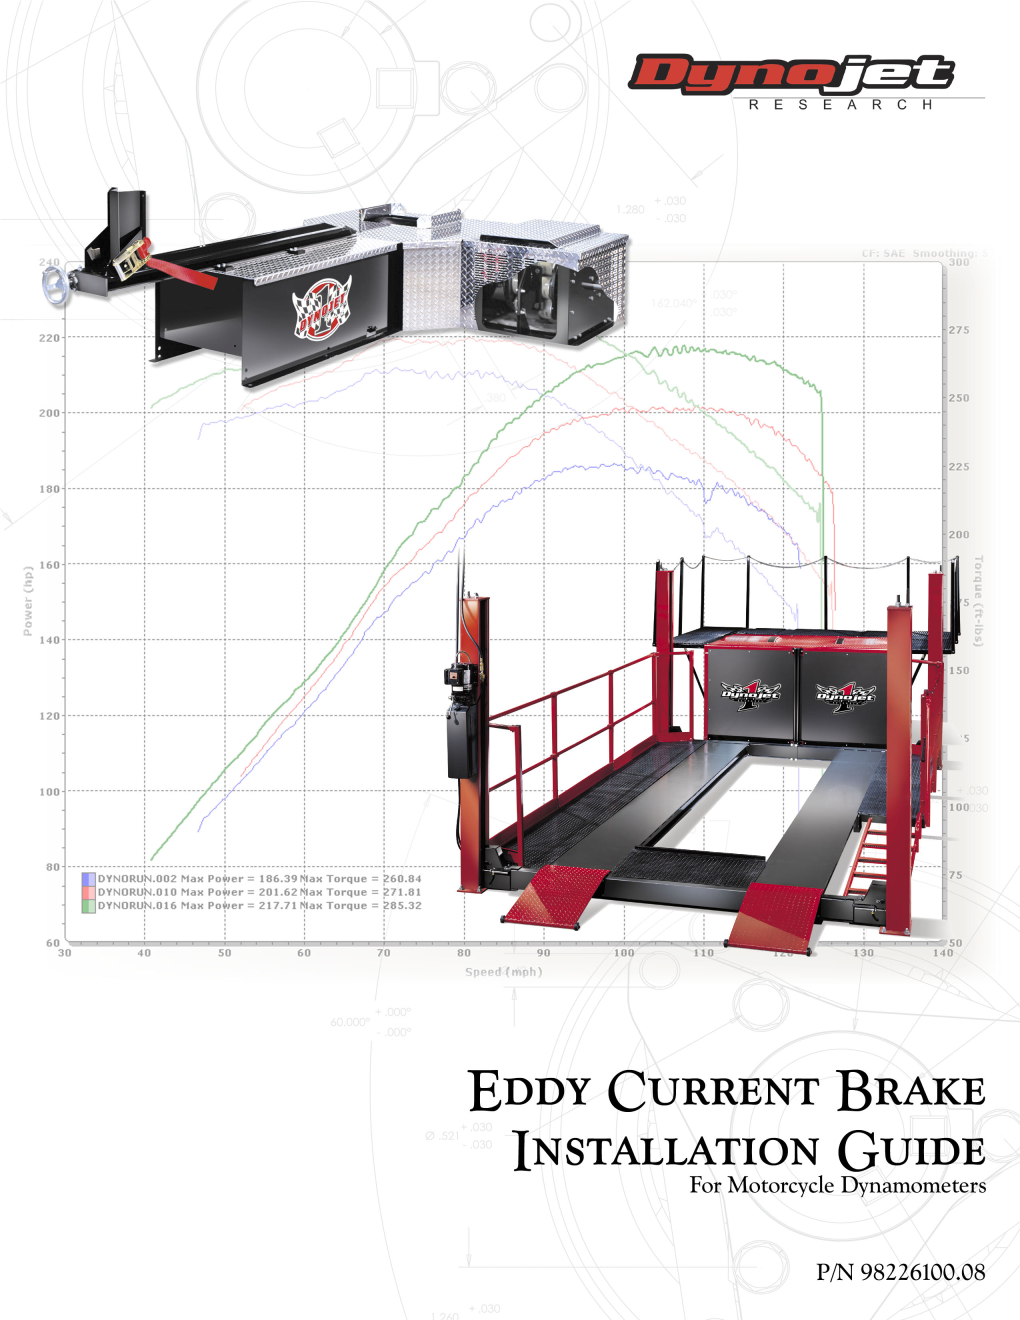 Eddy Current Brake Installation Guide for Model 250 Motorcycle Dynos